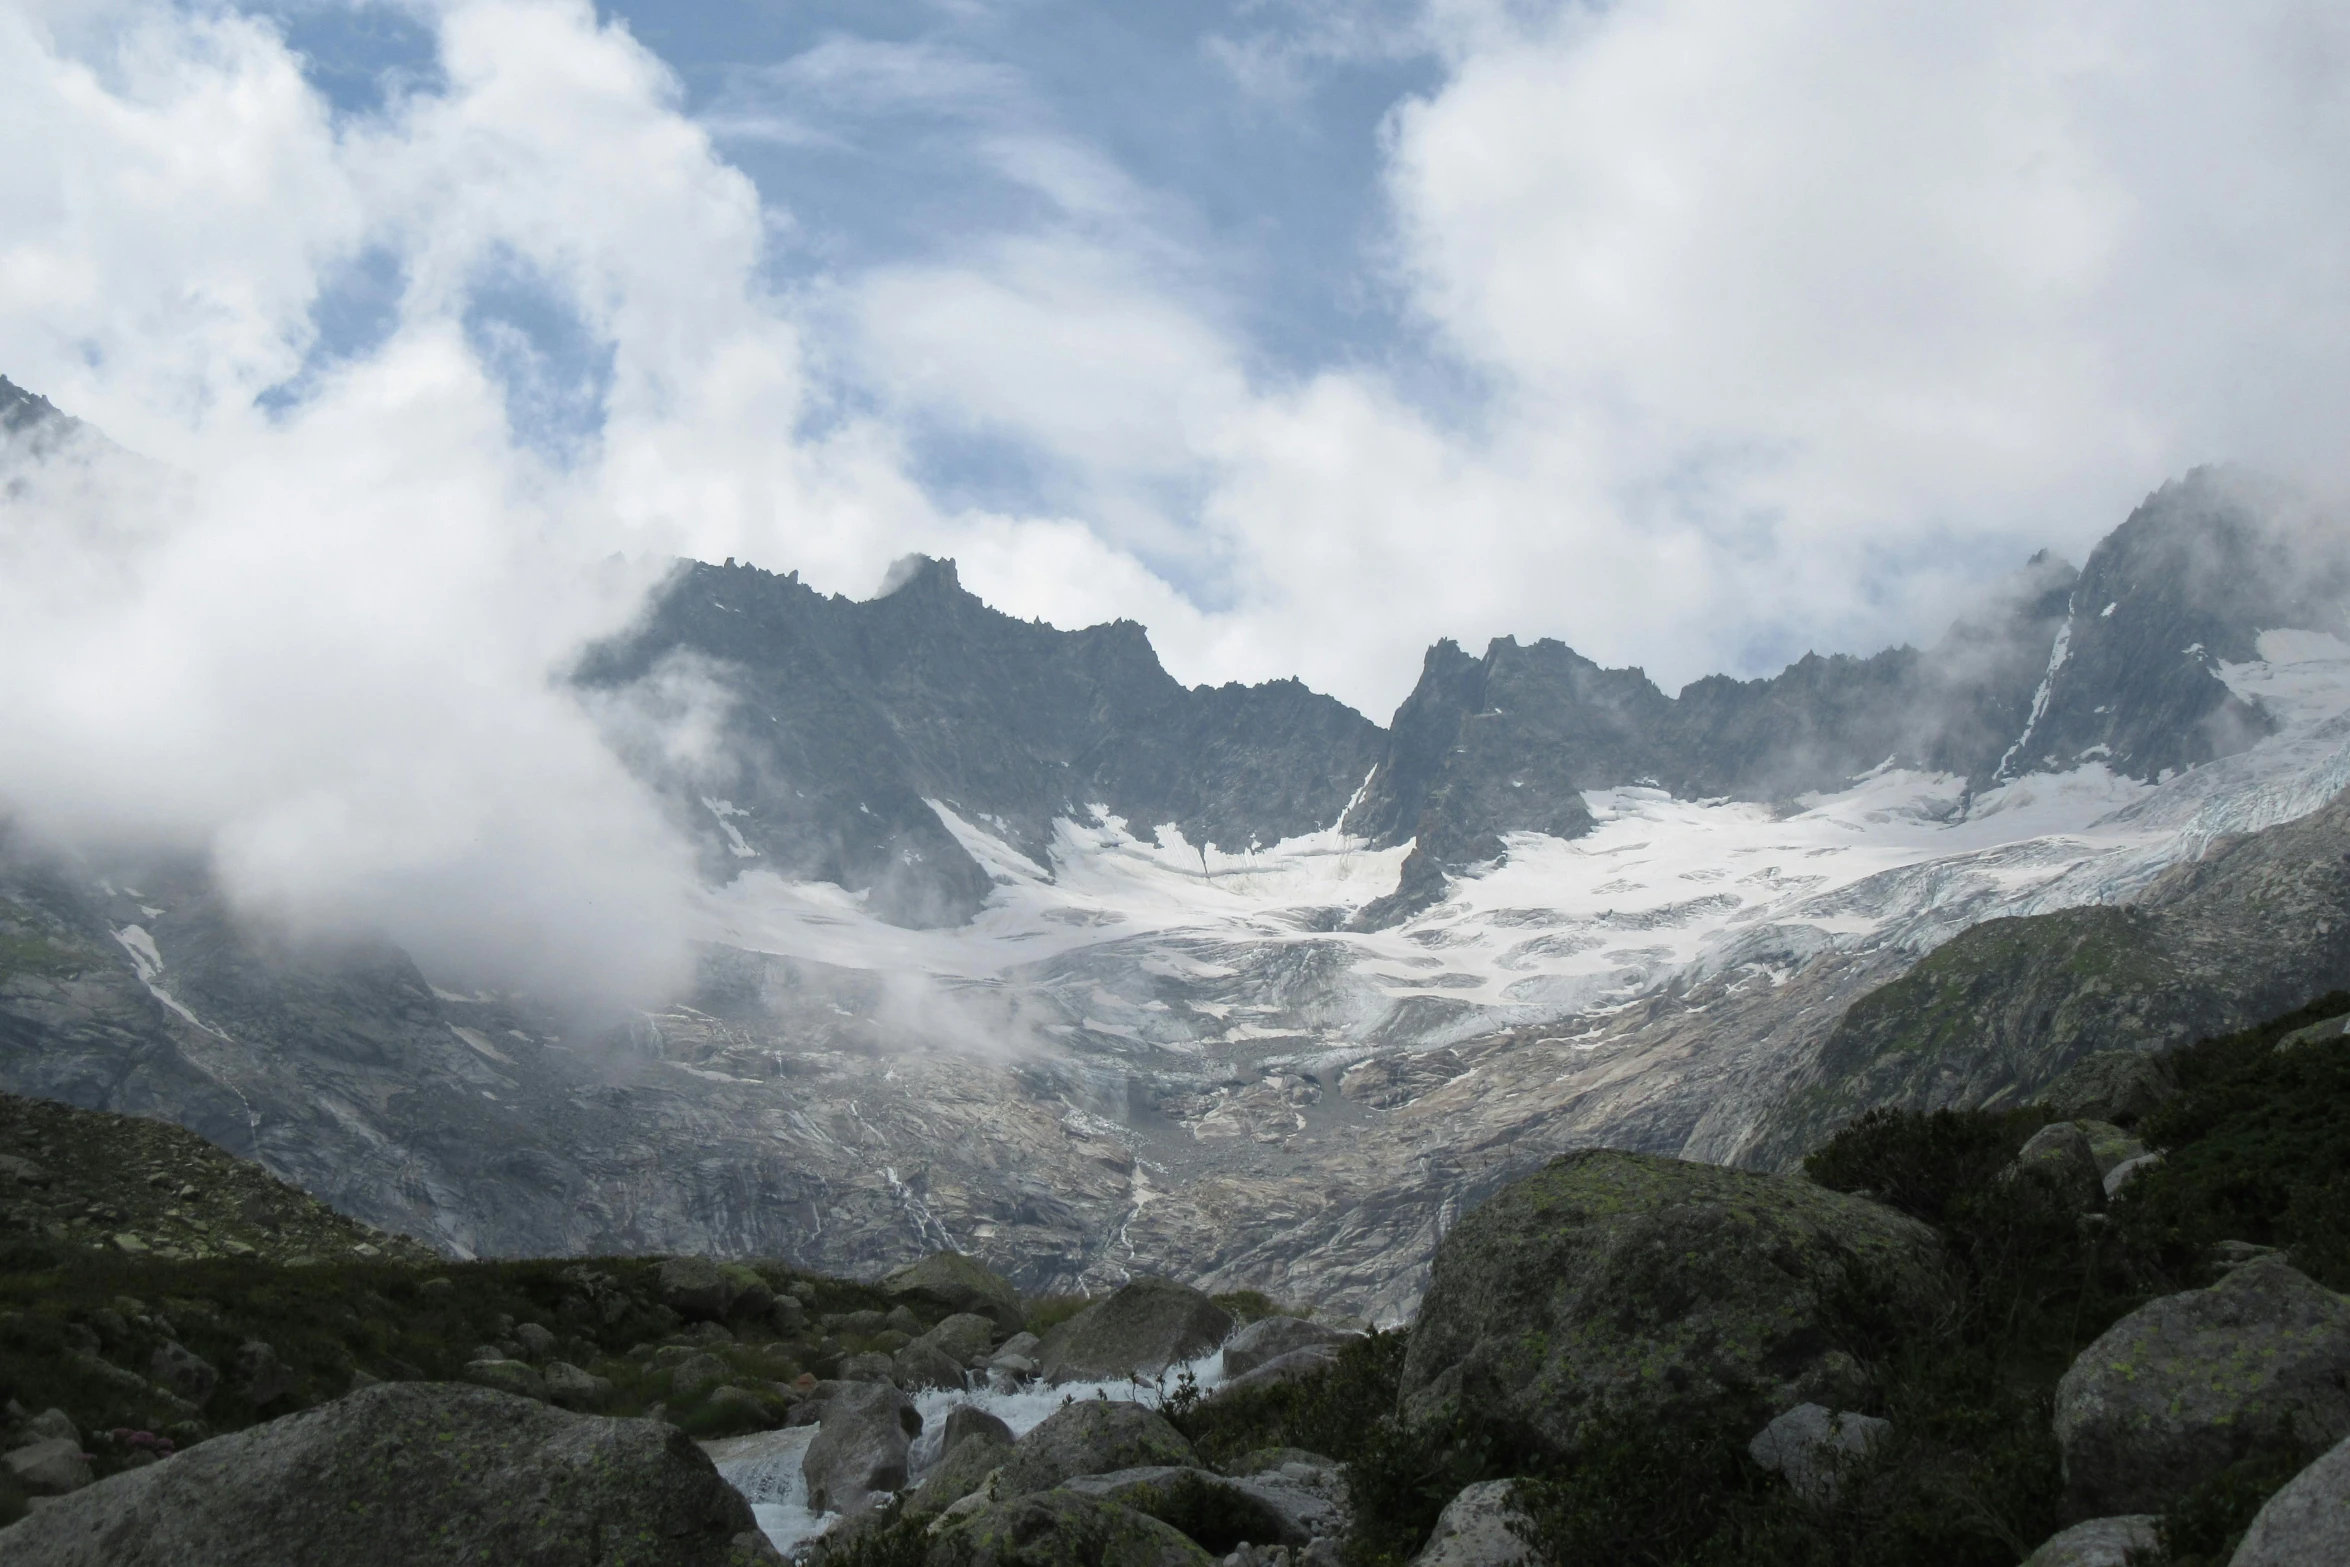 a large mountain covered in snow and clouds, by Werner Andermatt, pexels contest winner, les nabis, waterfalls in distance, glacier, 2000s photo, fan favorite